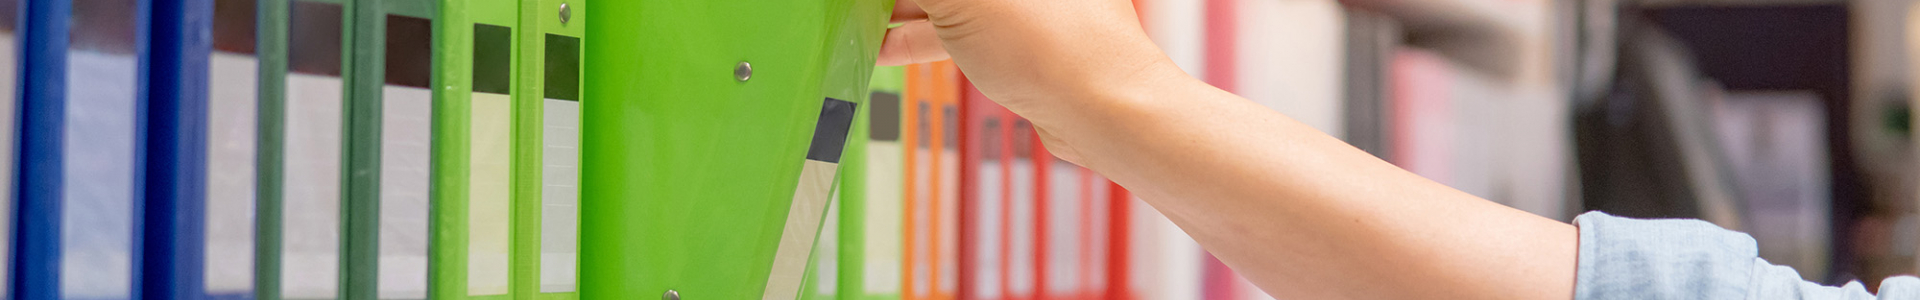 photo of someone grabbing a green binder off a shelf amidst other colorful binders